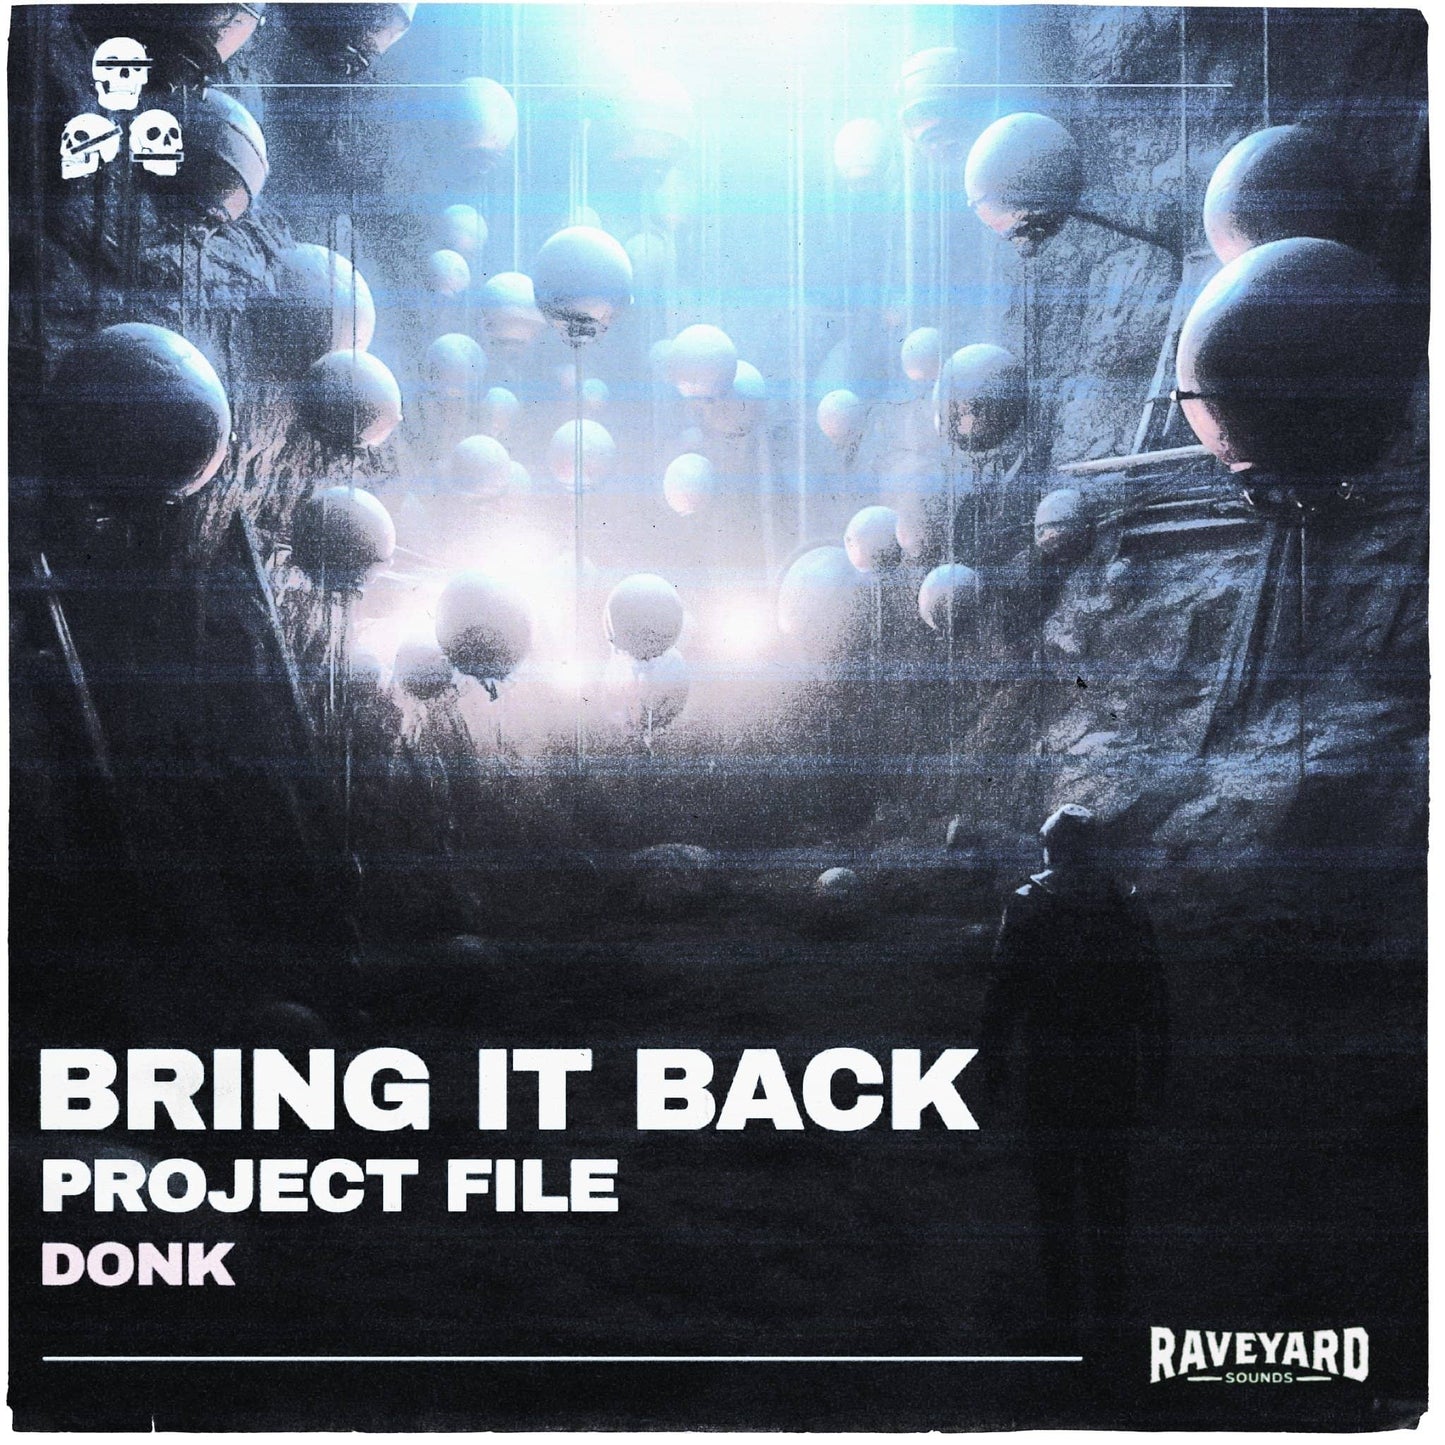 Bring It Back Project File (Donk)